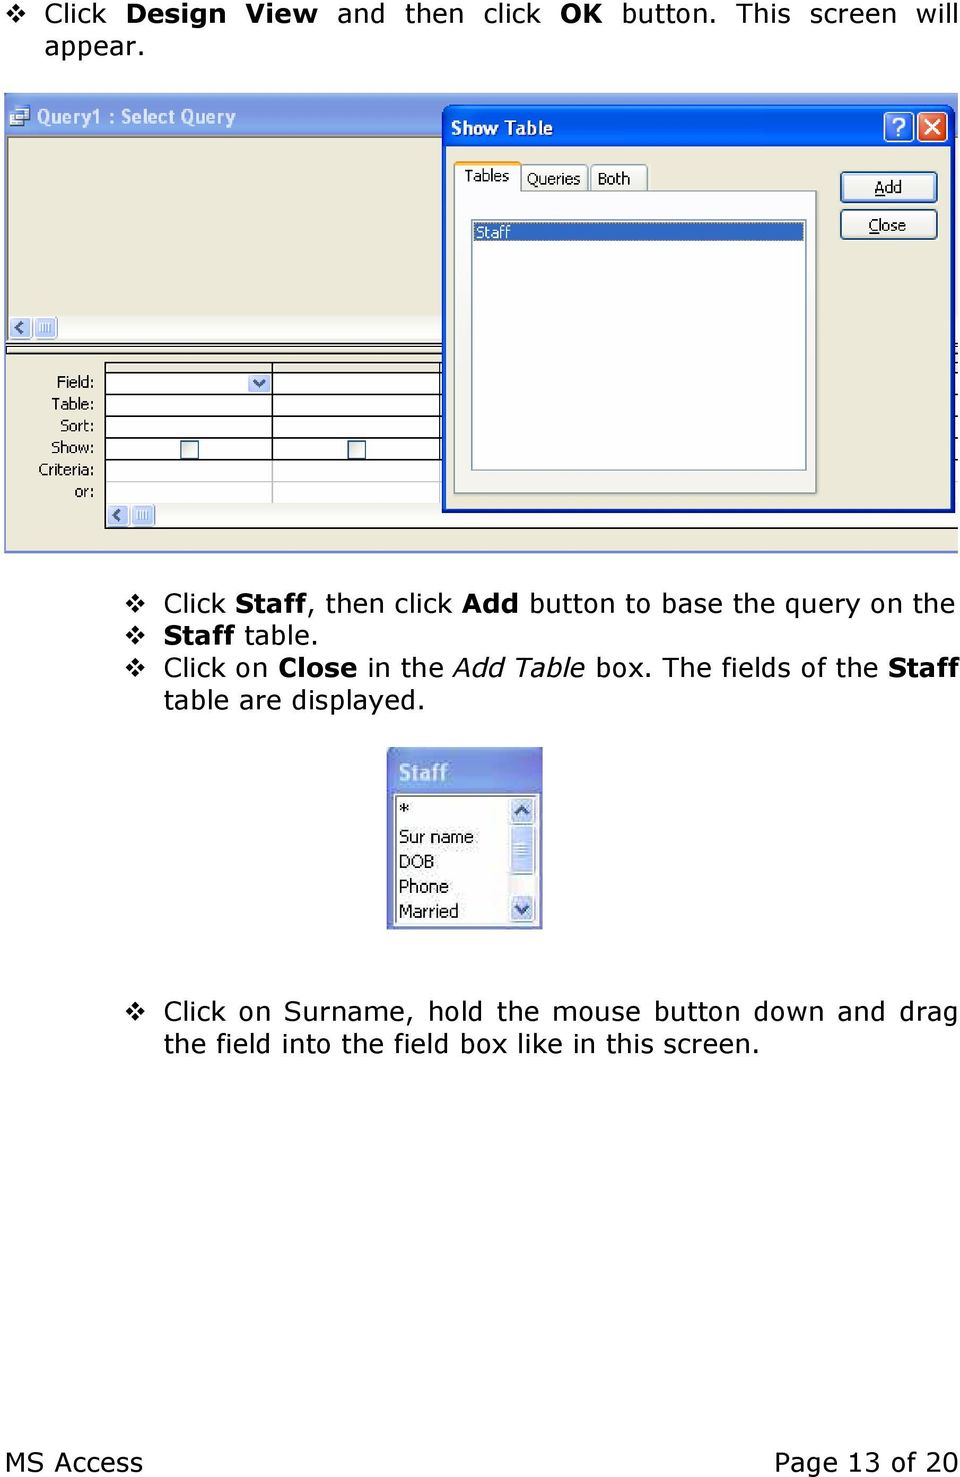 Click on Close in the Add Table box. The fields of the Staff table are displayed.